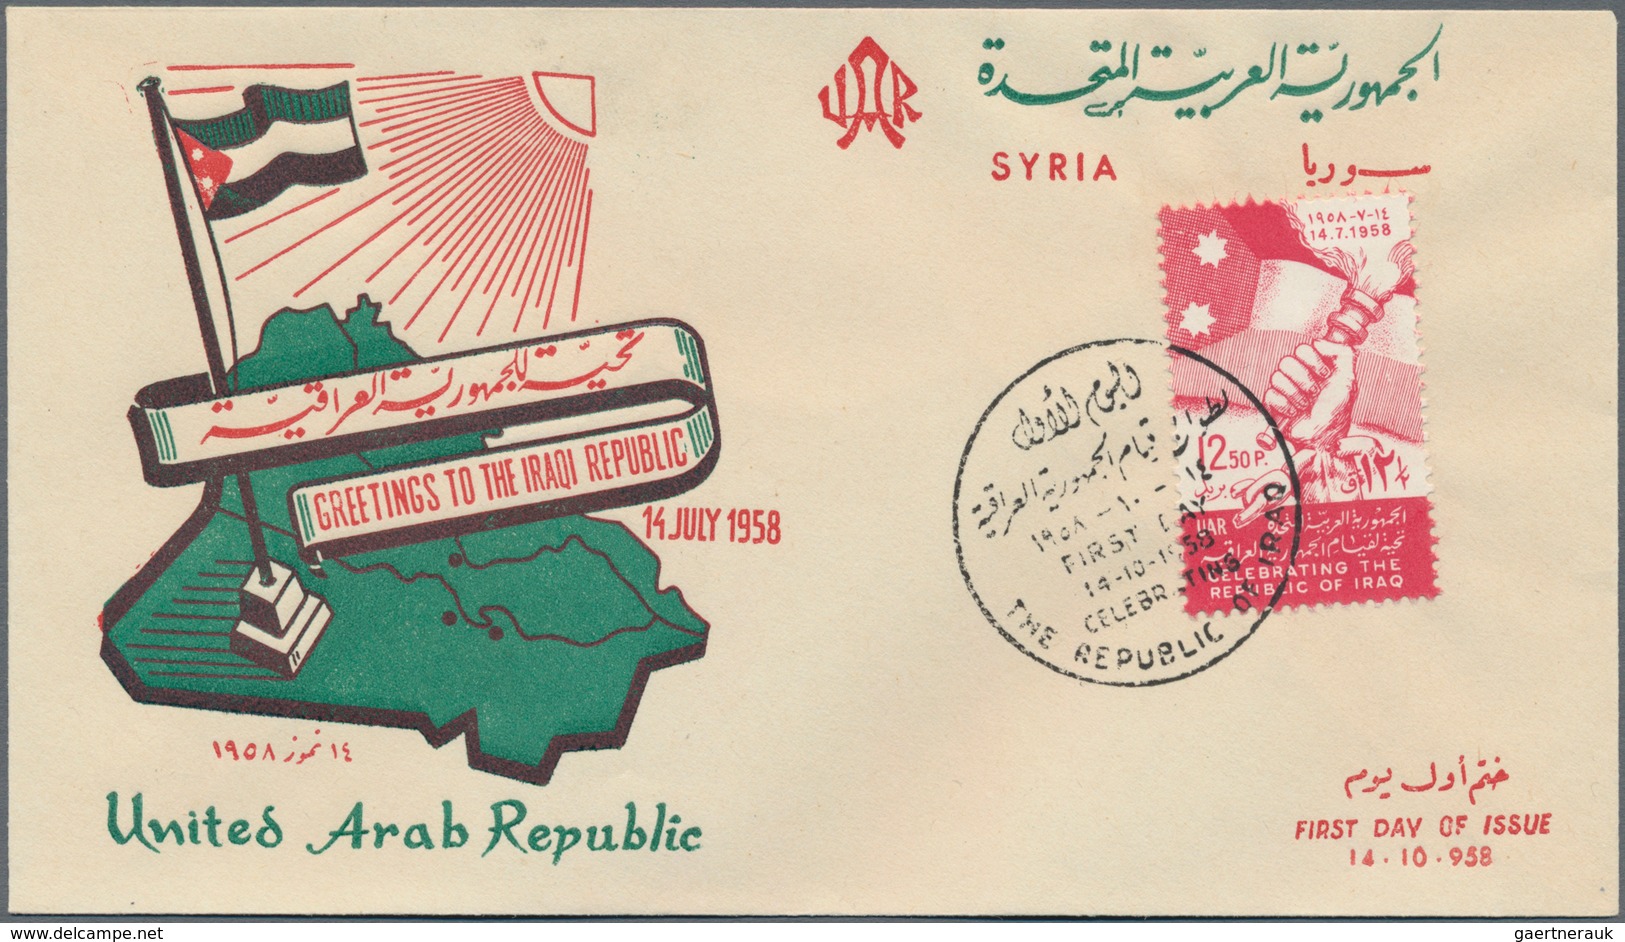 Syrien: 1958, FDCs, cpl. run of 12 sets on OFFICIAL FIRST DAY COVERS, including also the scare DAMAS